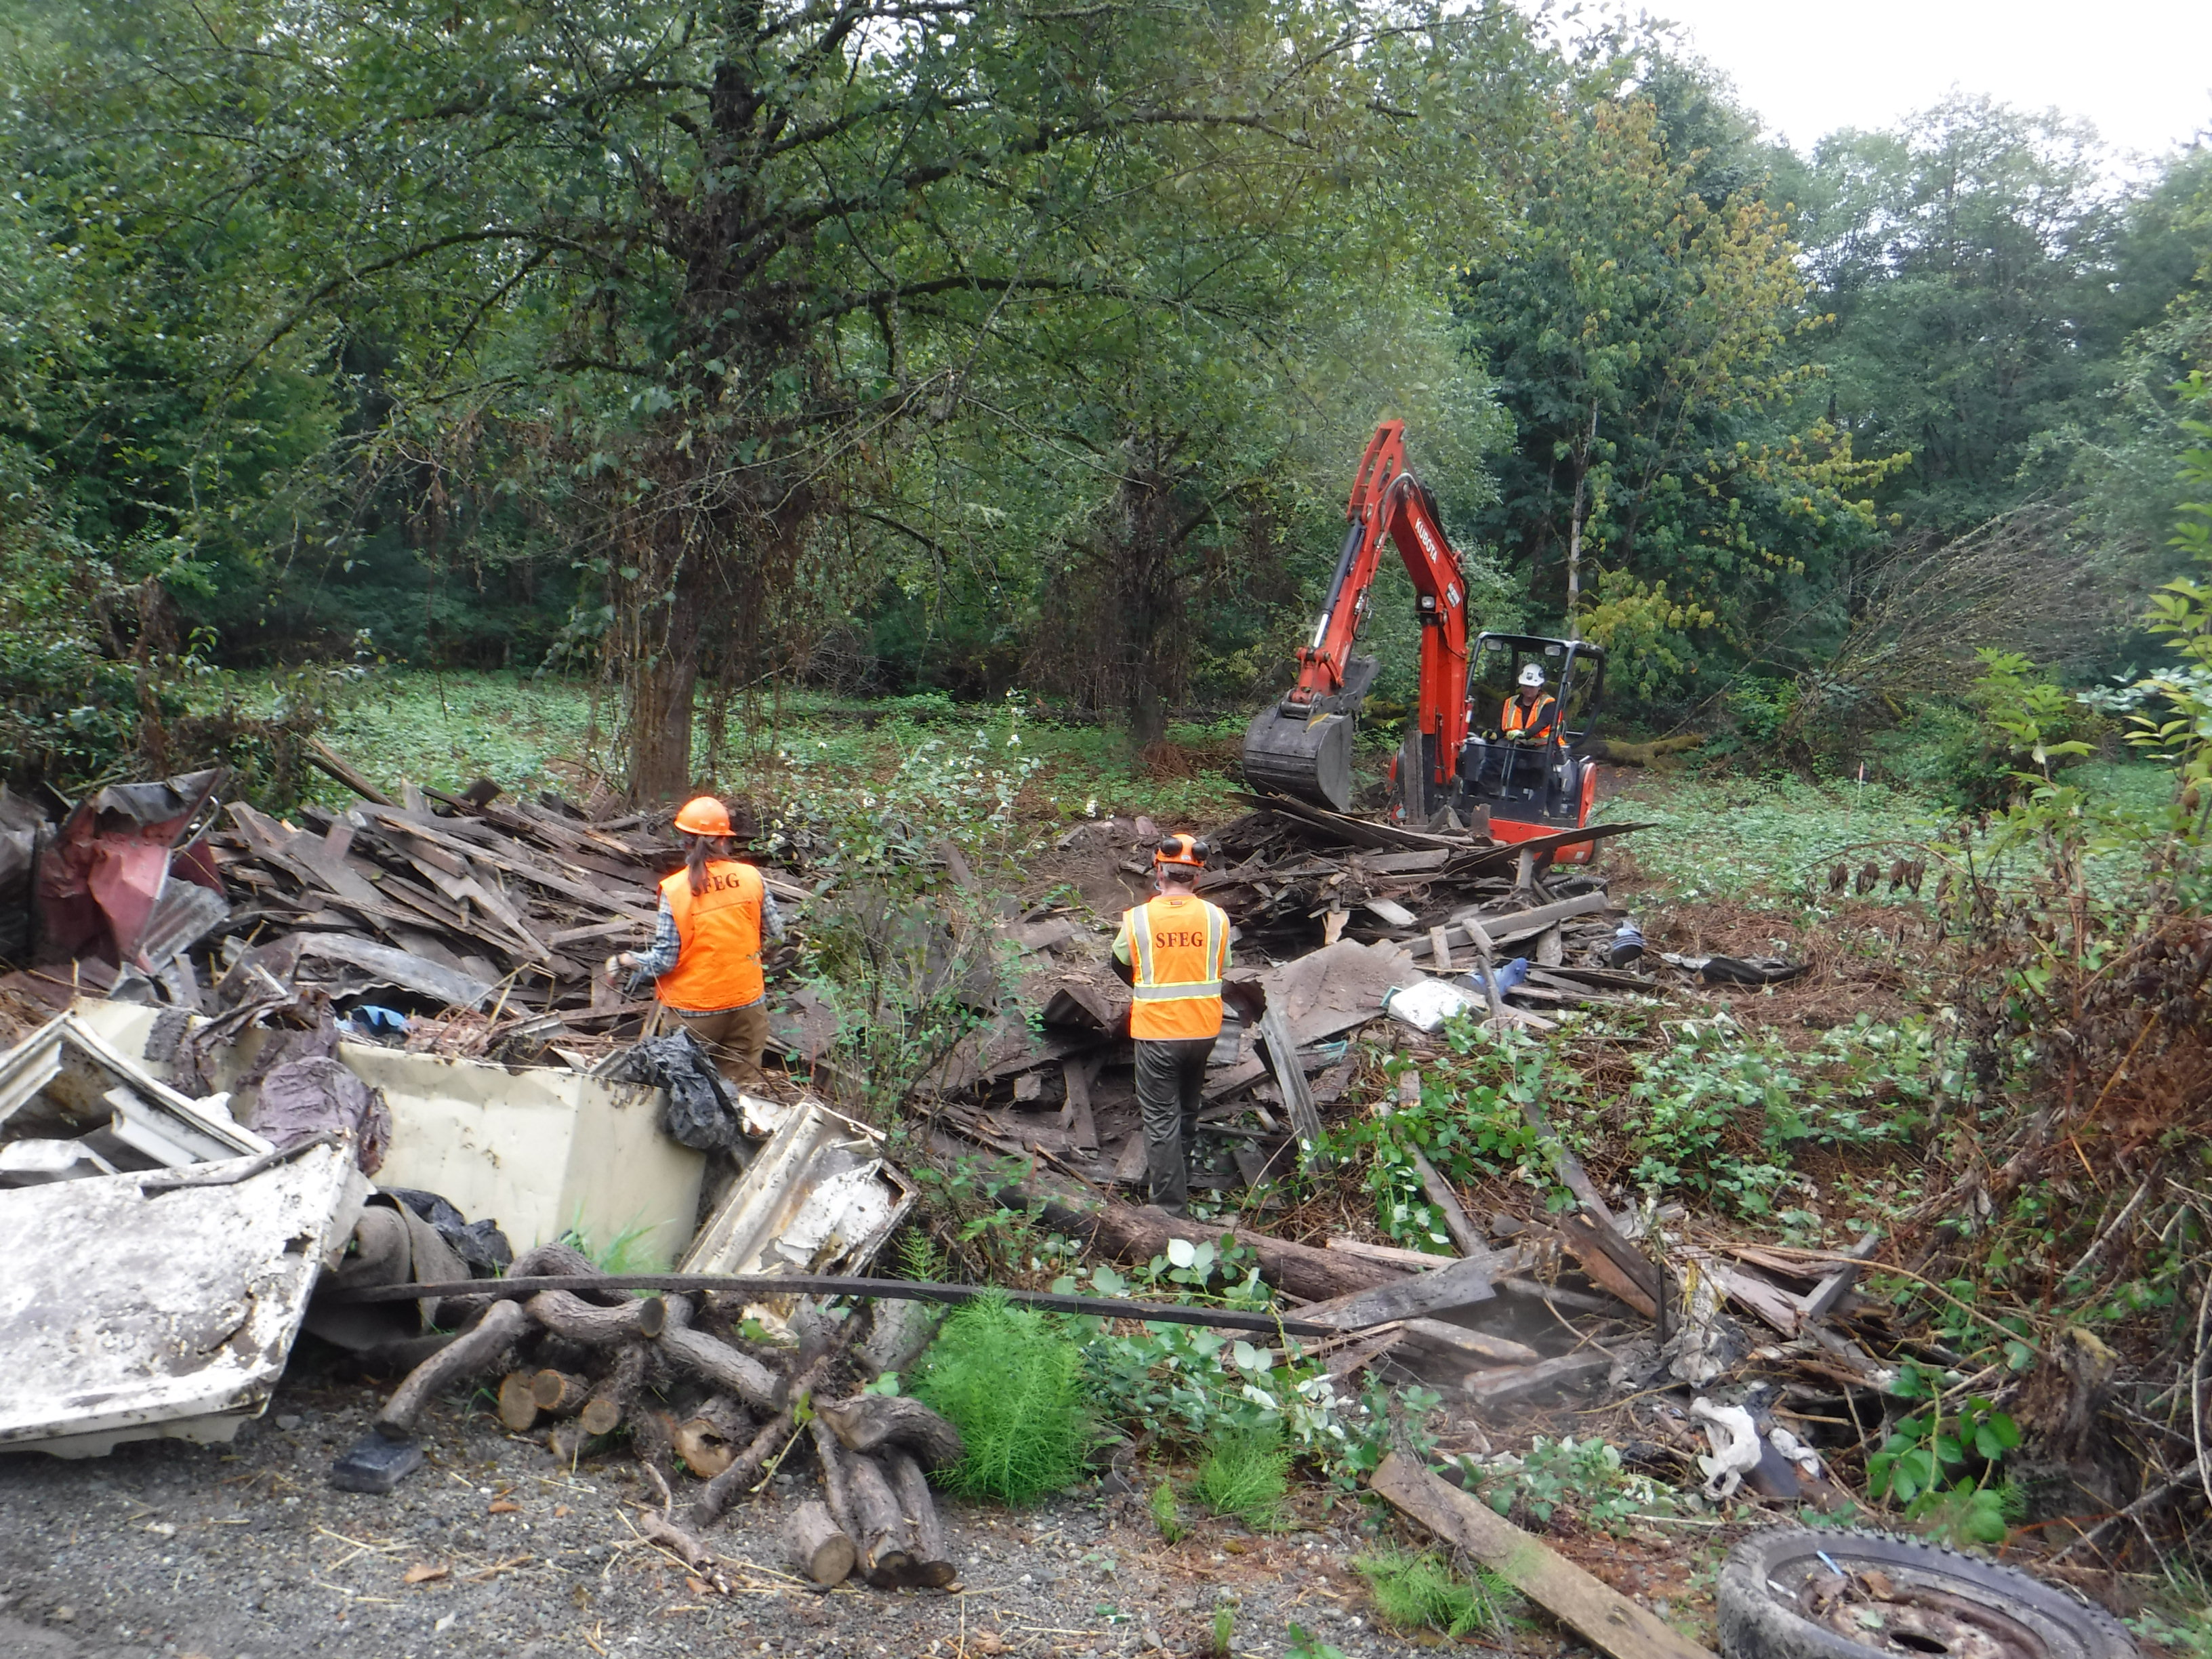 Volunteers from Skagit Fisheries Enhancement Group remove several truckloads of metal trash from Muddy Creek Conservation Area in September, 2017. Photograph credit: Skagit Land Trust staff.